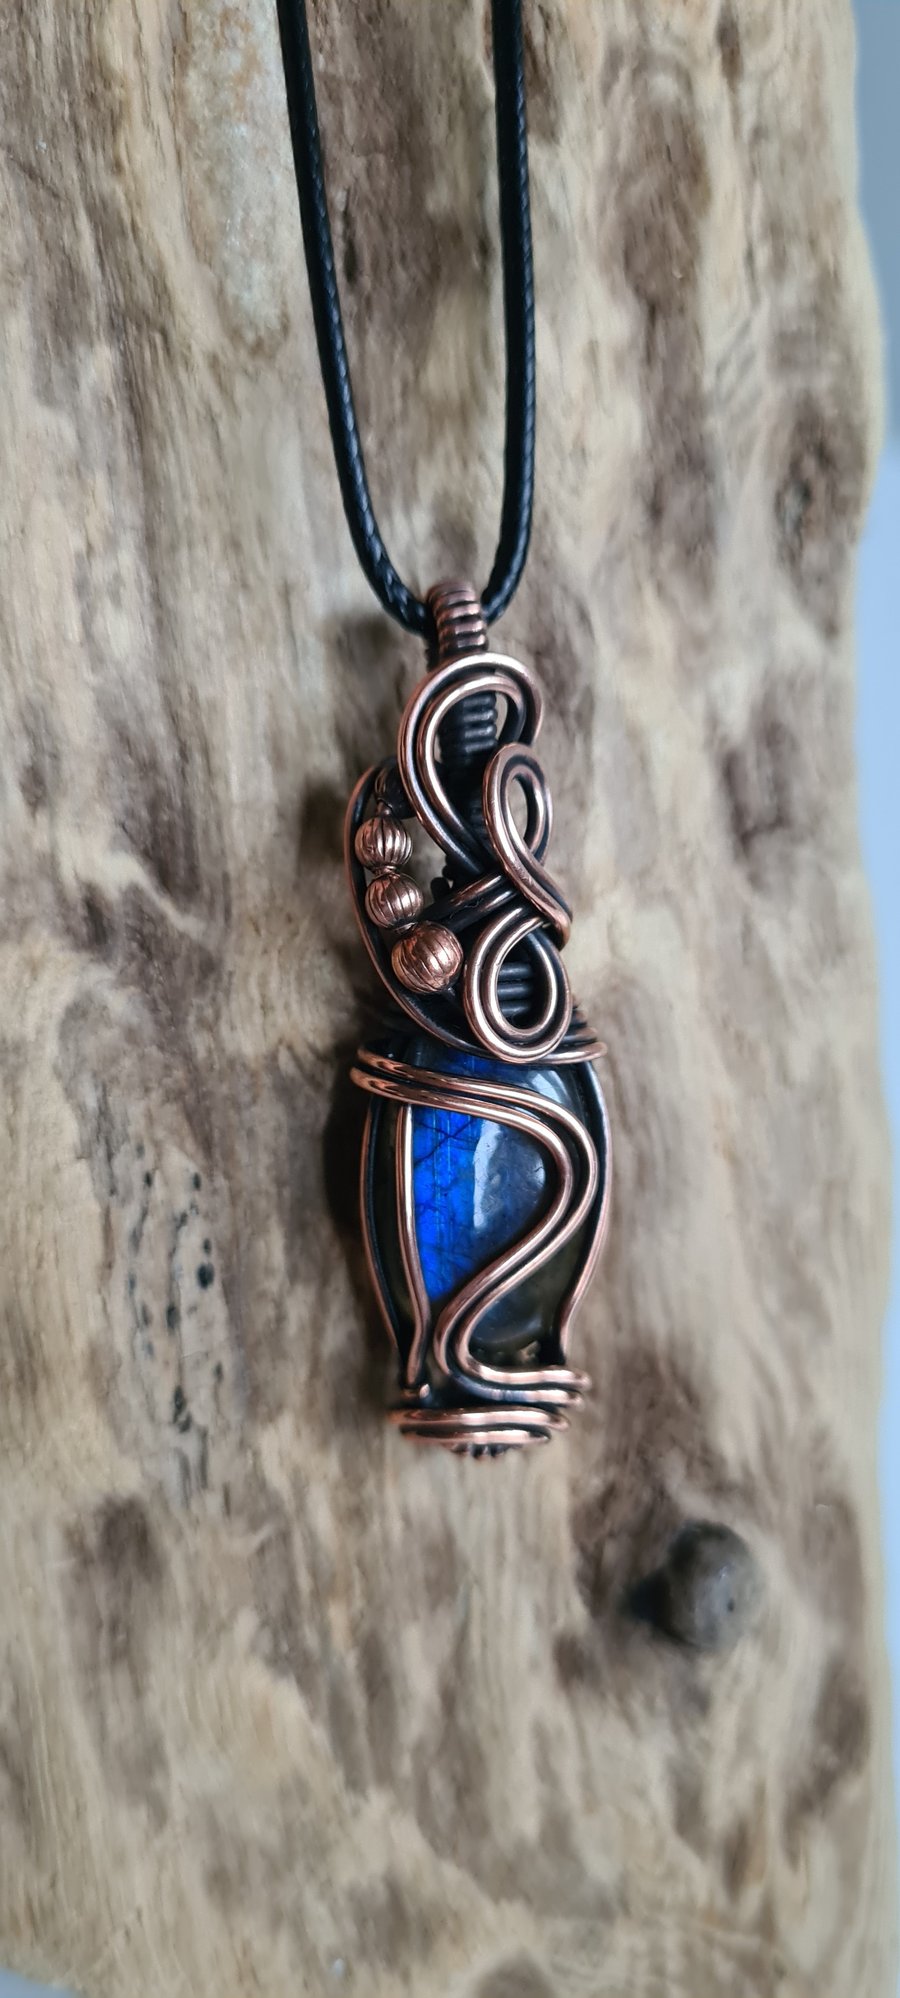 Handmade Natural Blue Labradorite Copper Pendant Necklace Gift Crystal Jewellery